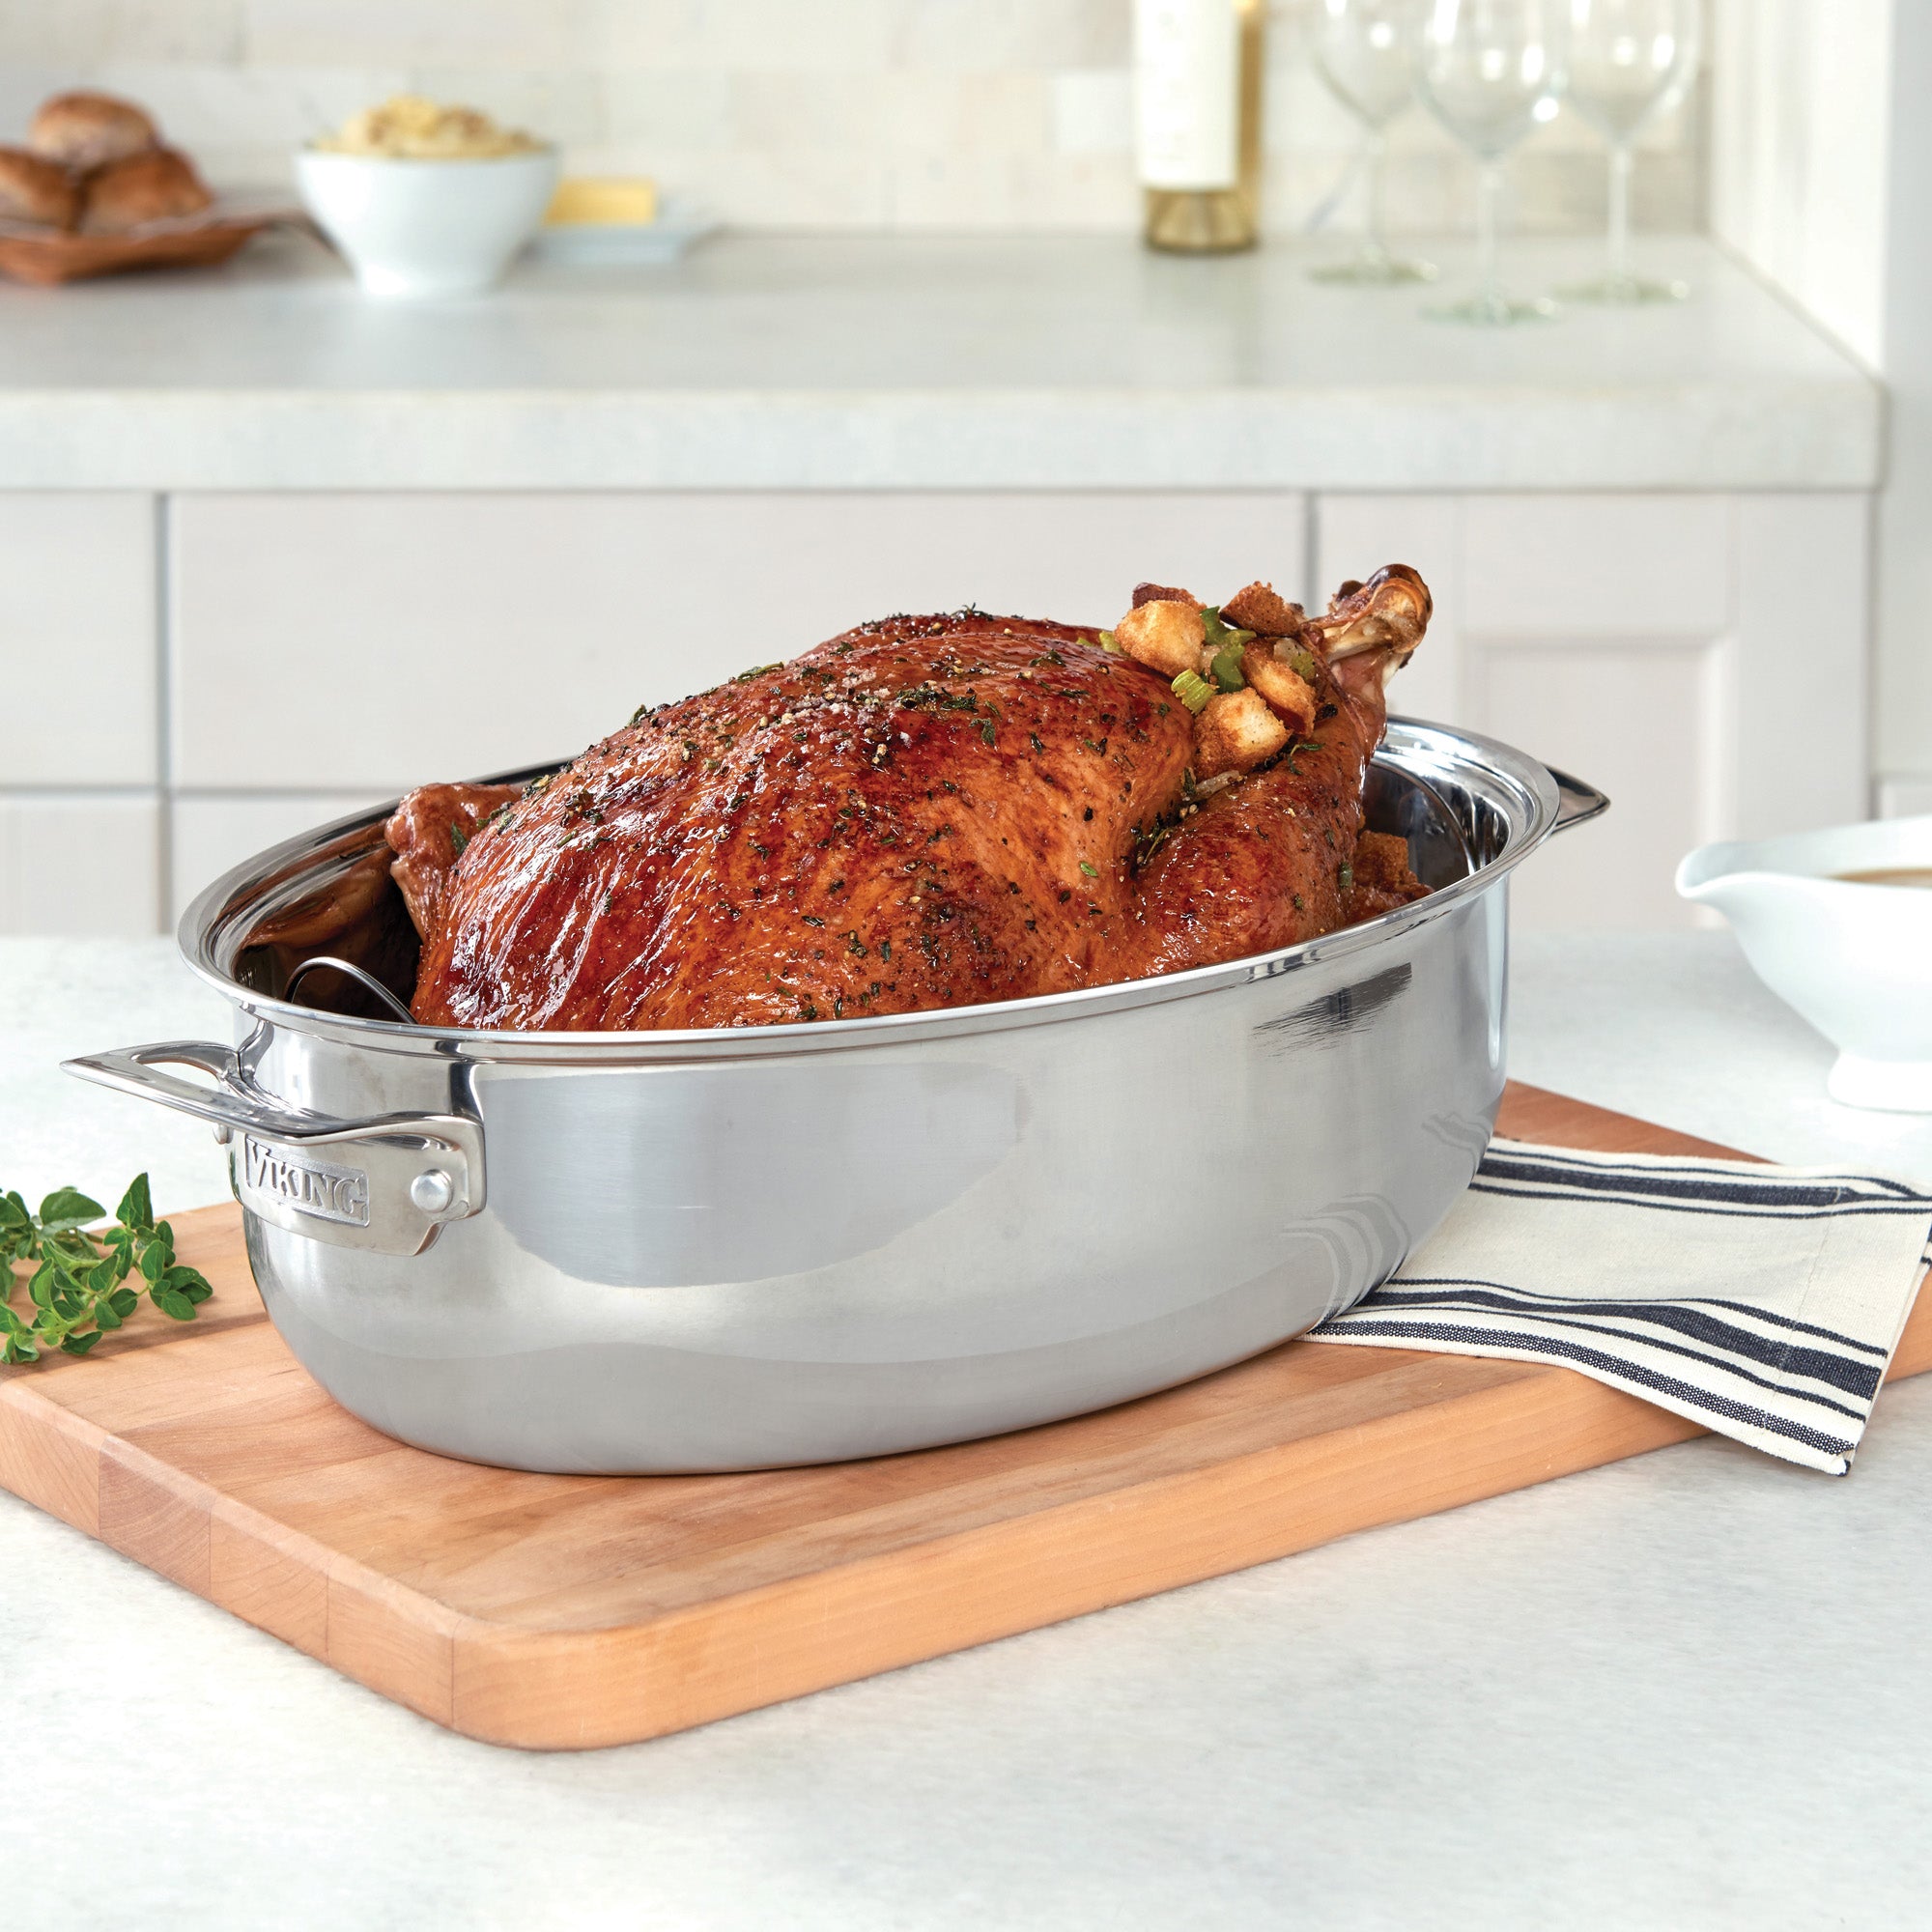 Viking 3-Ply 8.5-quart 3-in-1 Oval Roaster with Rack